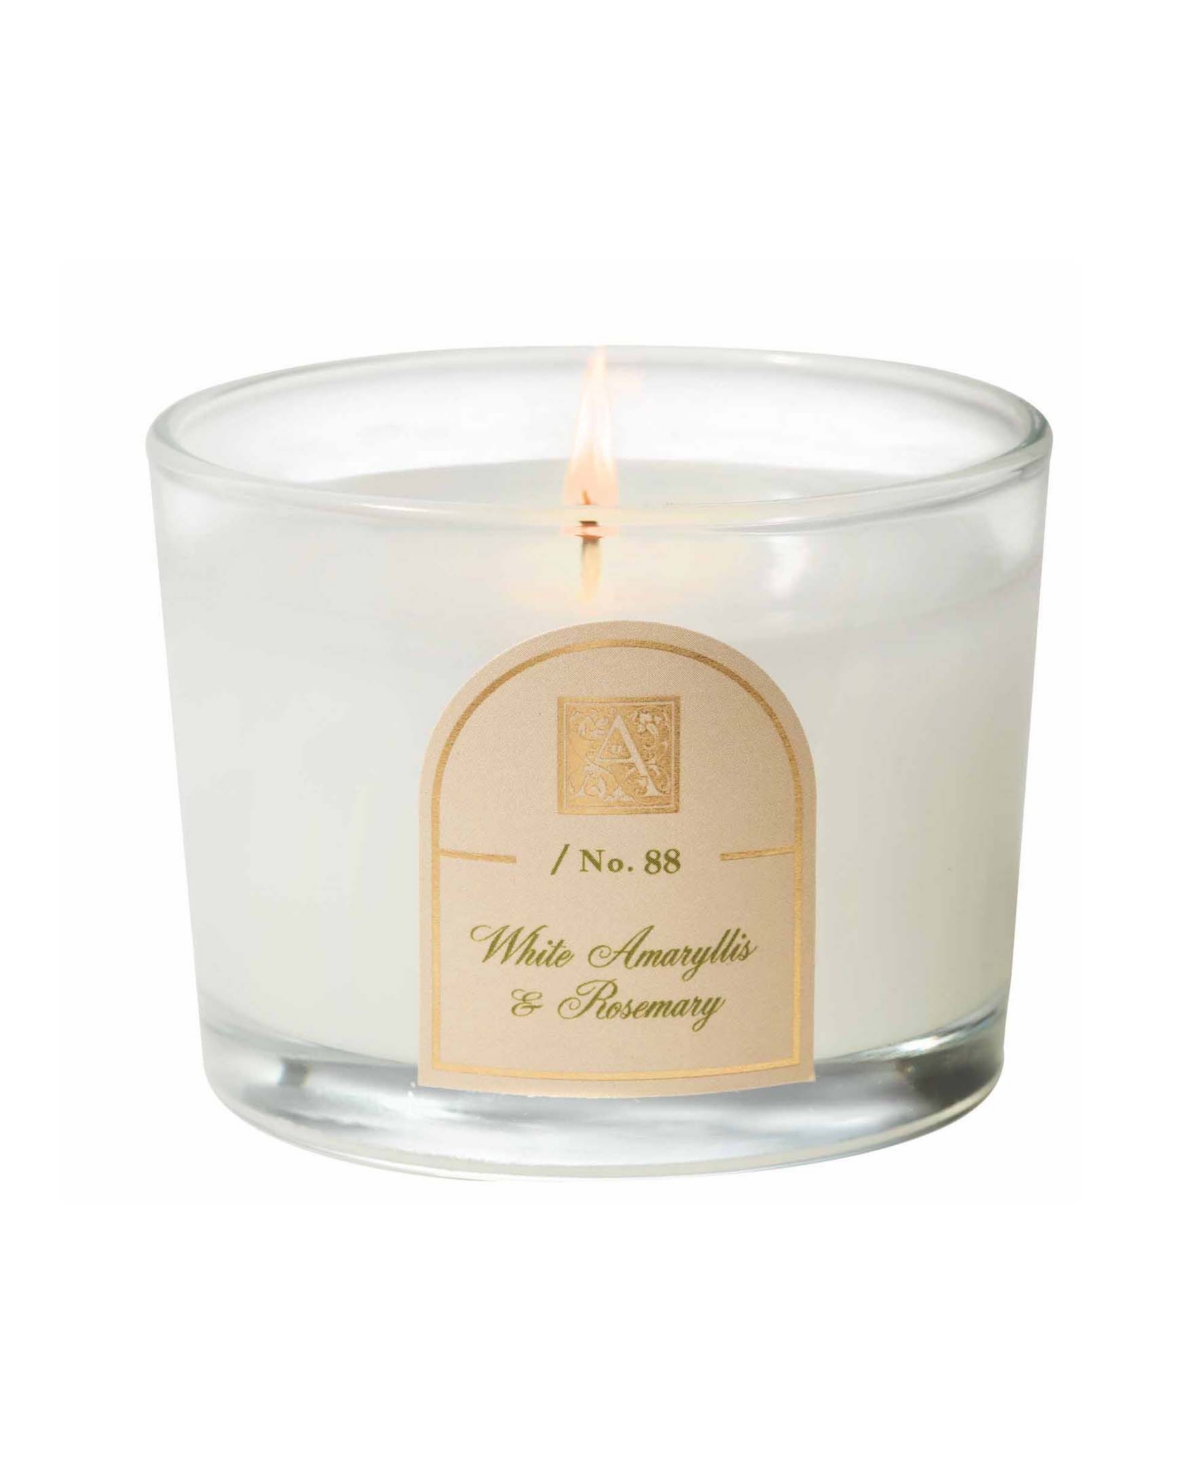 Aromatique White Amaryllis And Rosemary Petite Tumbler Candle In Clear Glass Candle